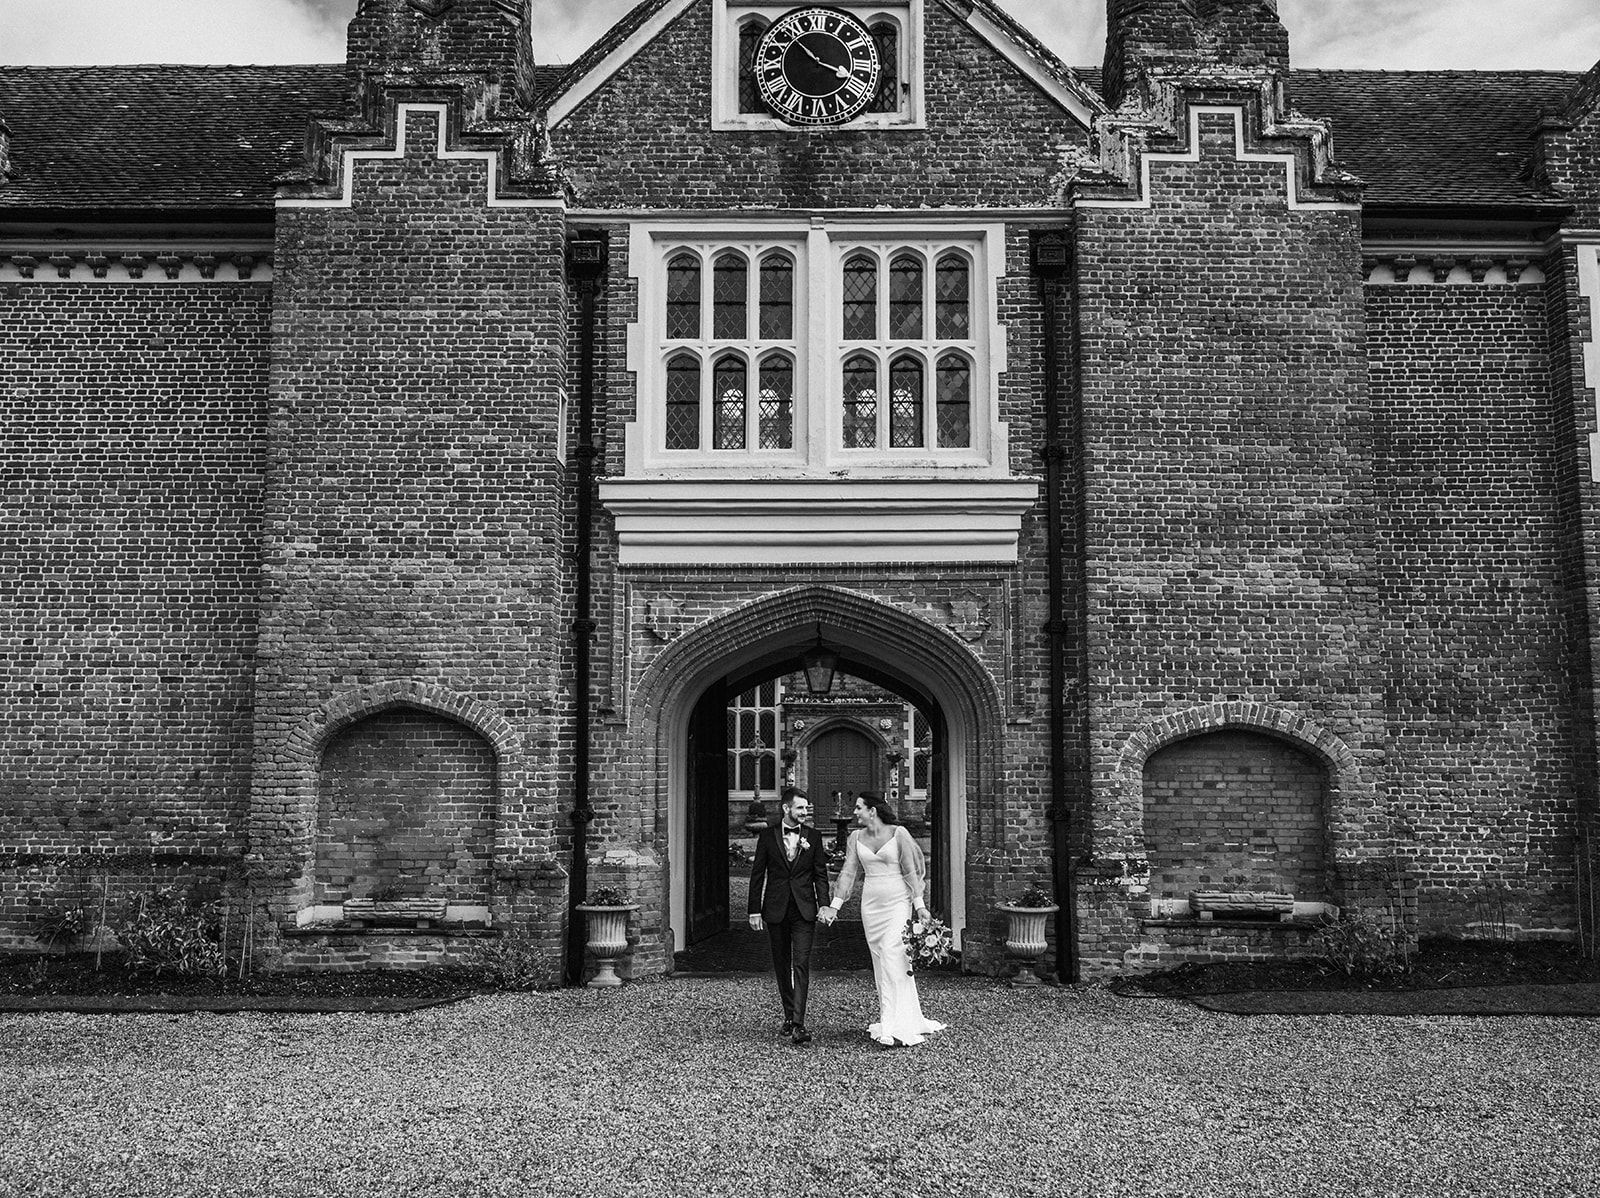 A black and white photo of a bride and groom standing in front of a brick building.